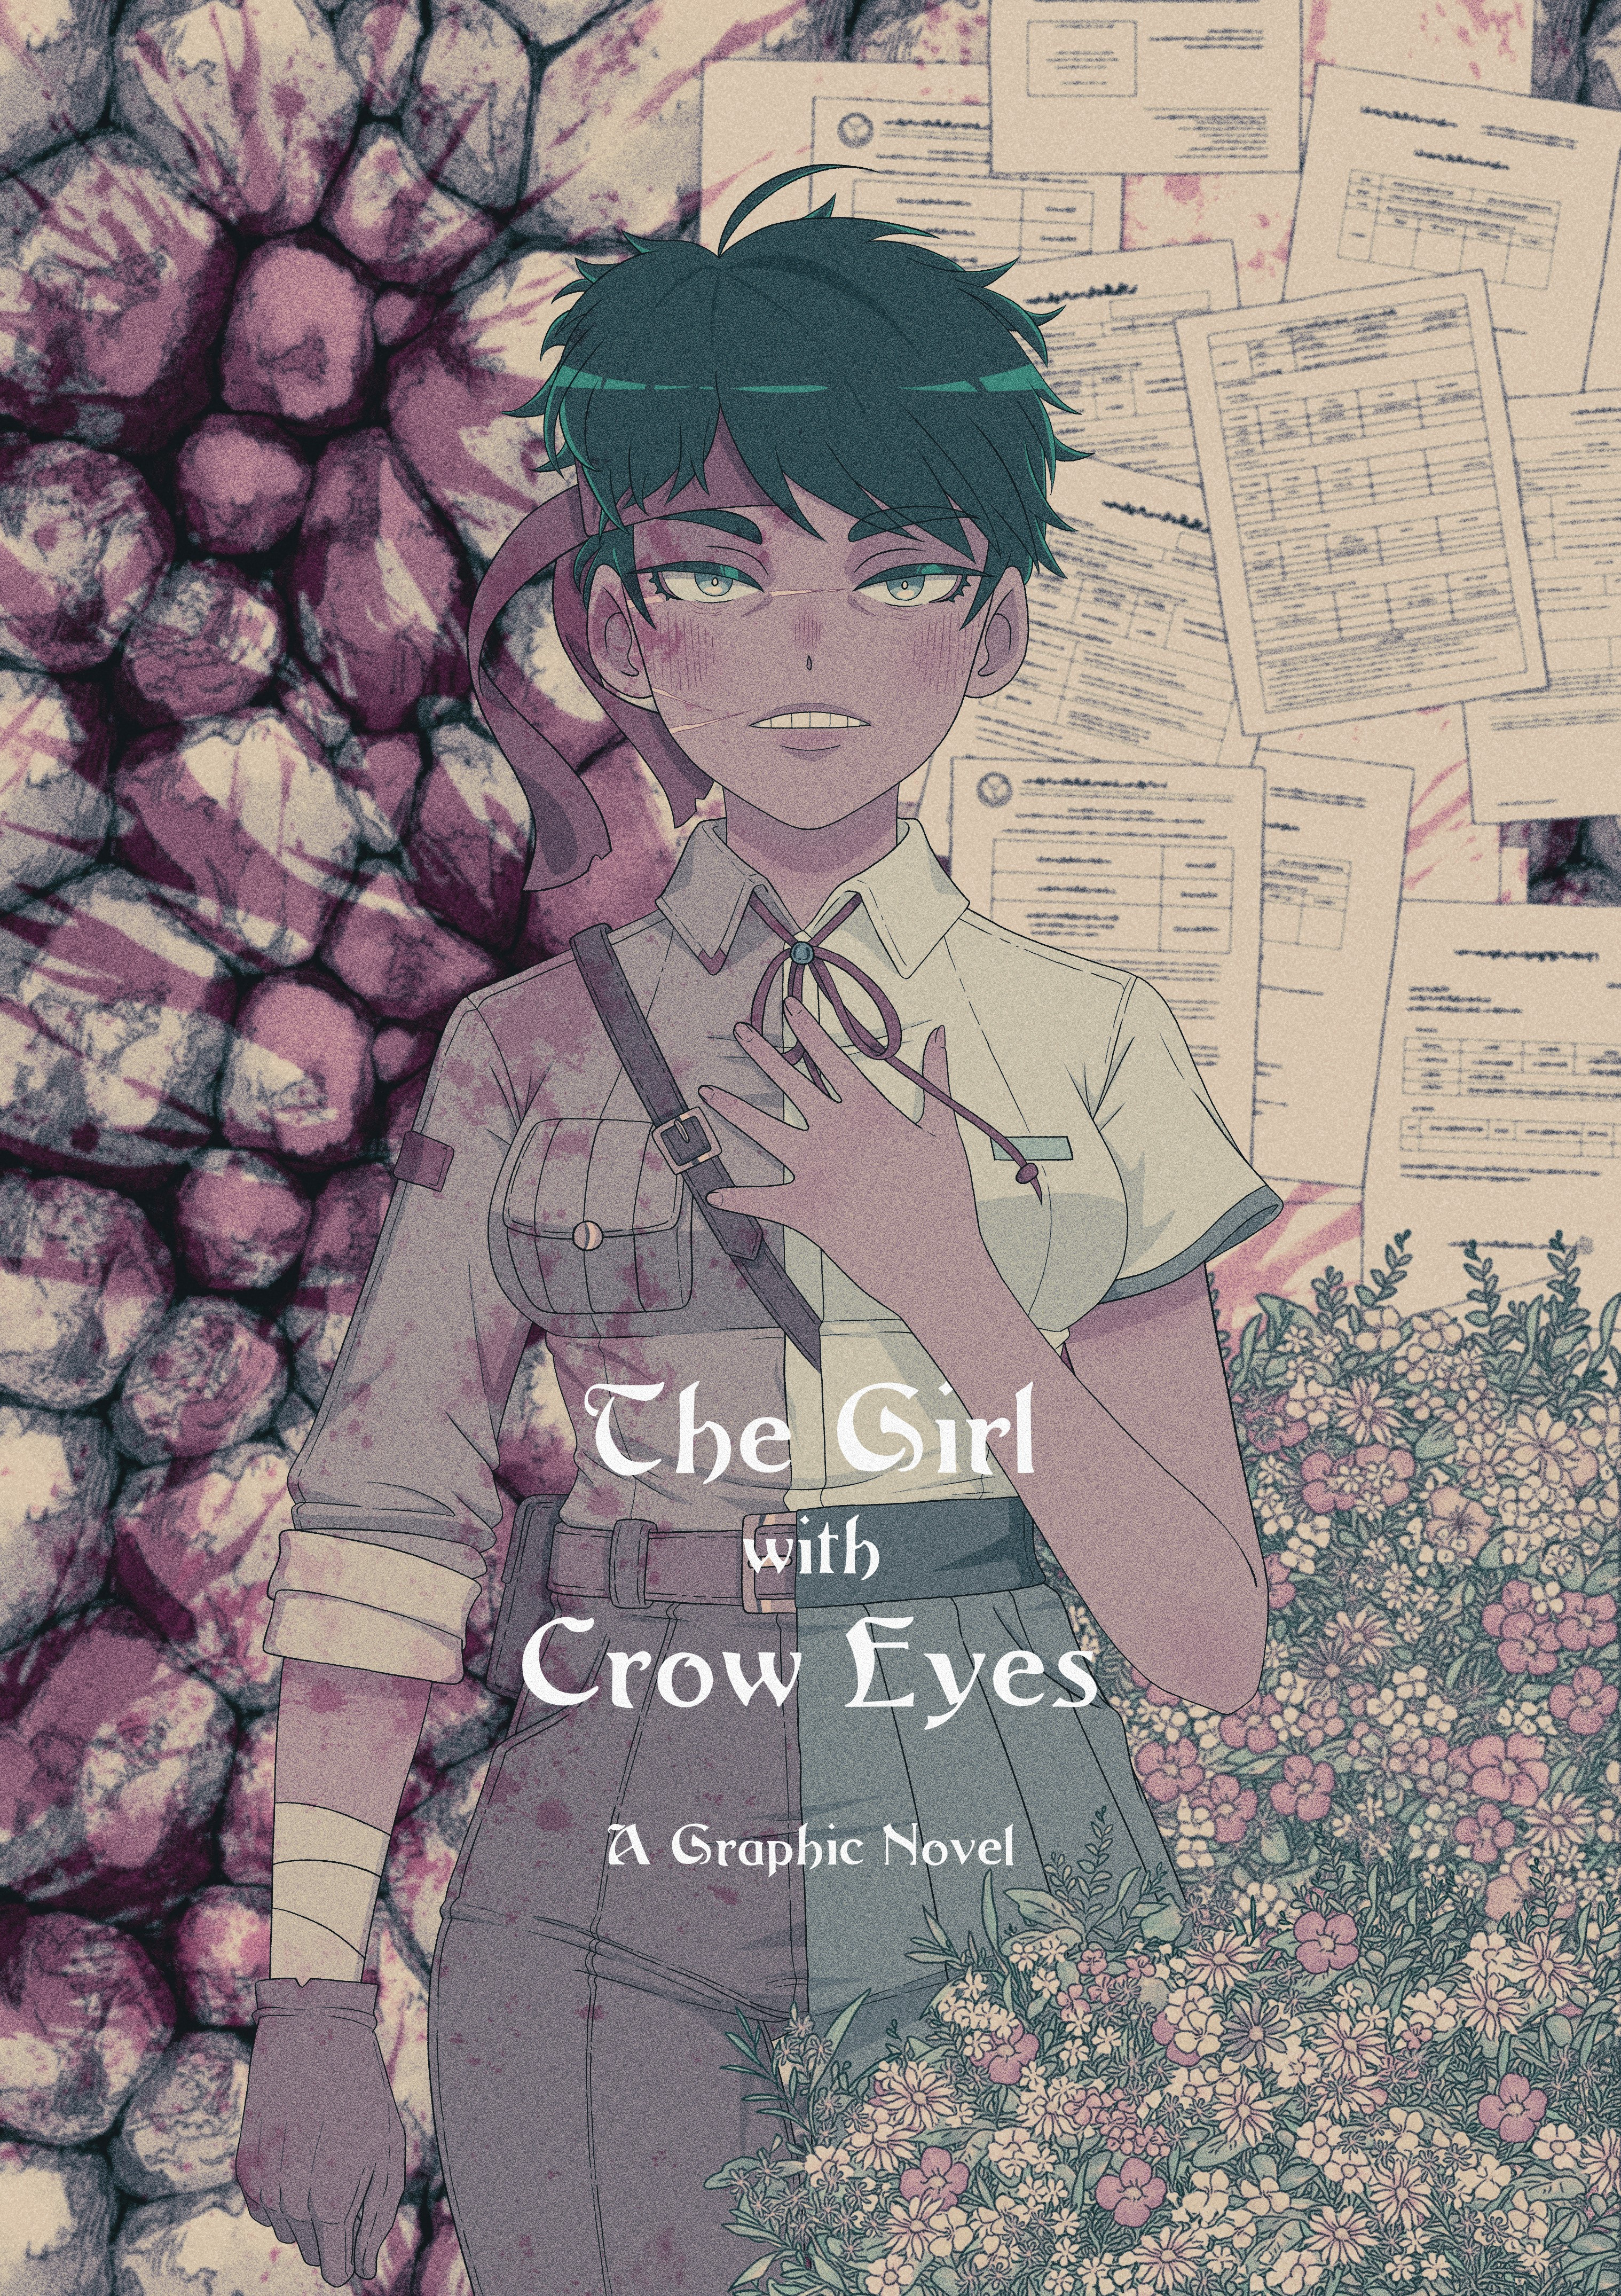 "The Girl with Crow Eyes"